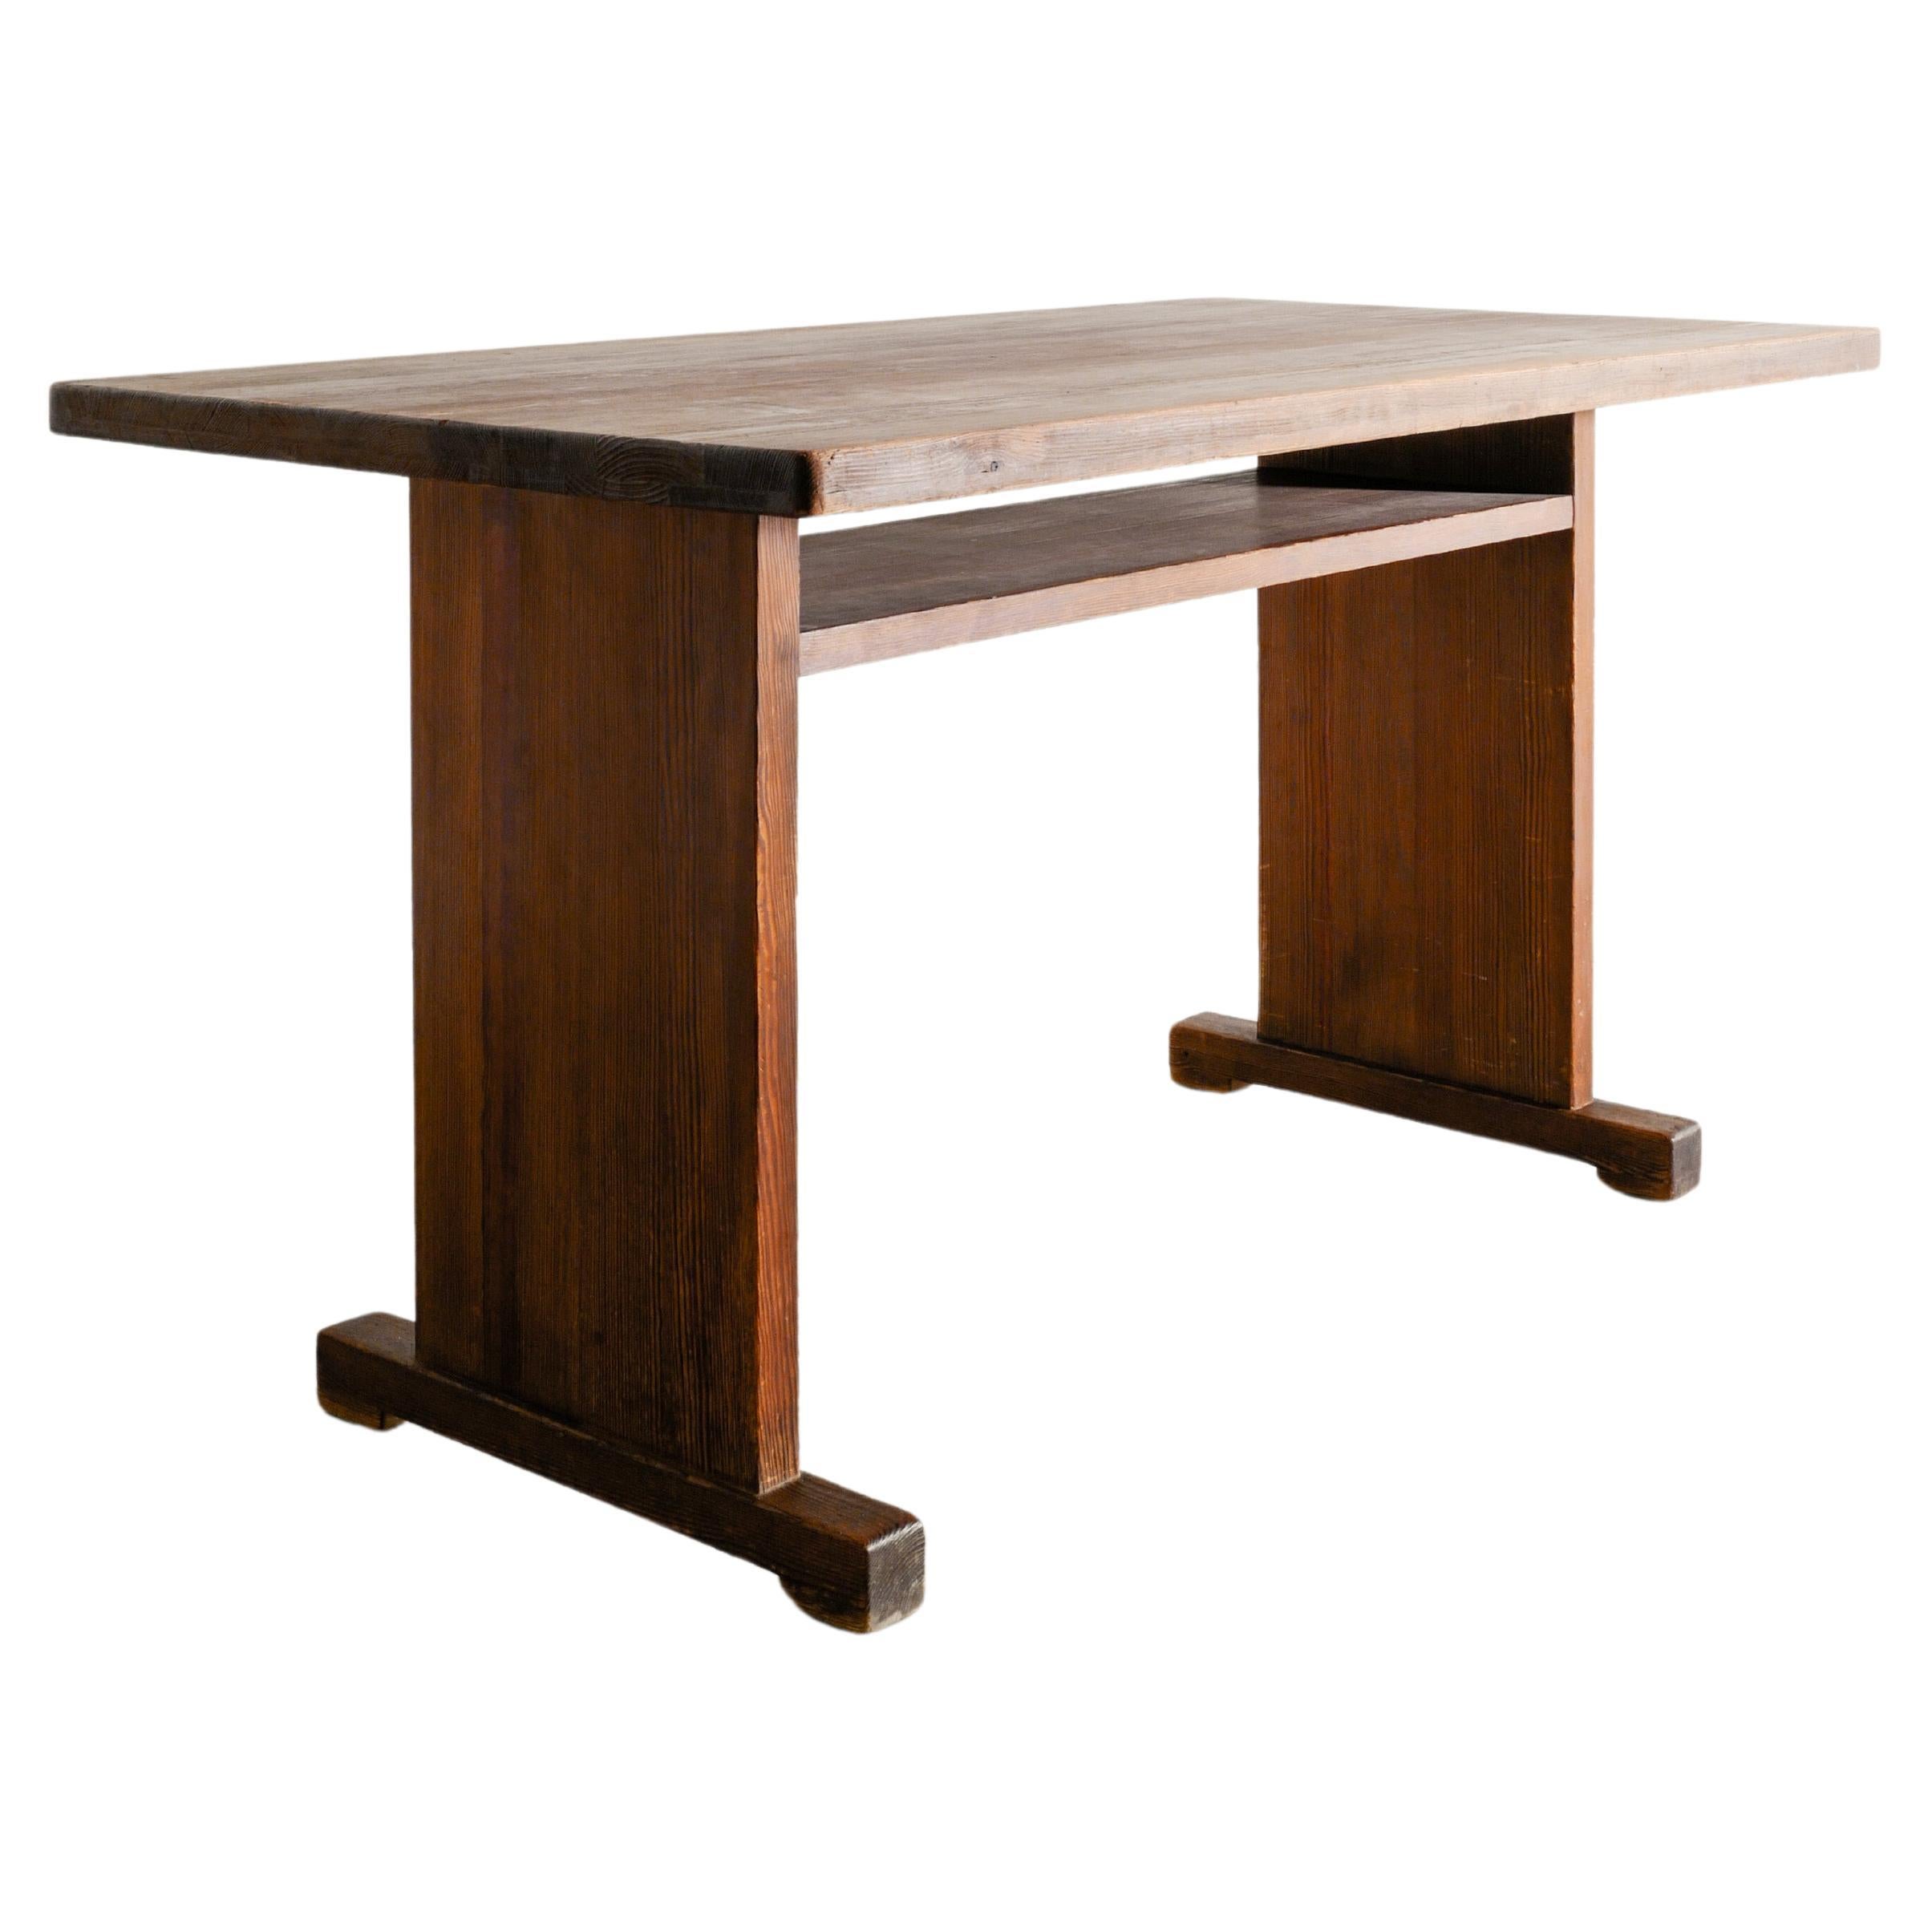 Swedish Pine Table / Desk in style of Axel Einar Hjorth Produced in Sweden 1930s For Sale